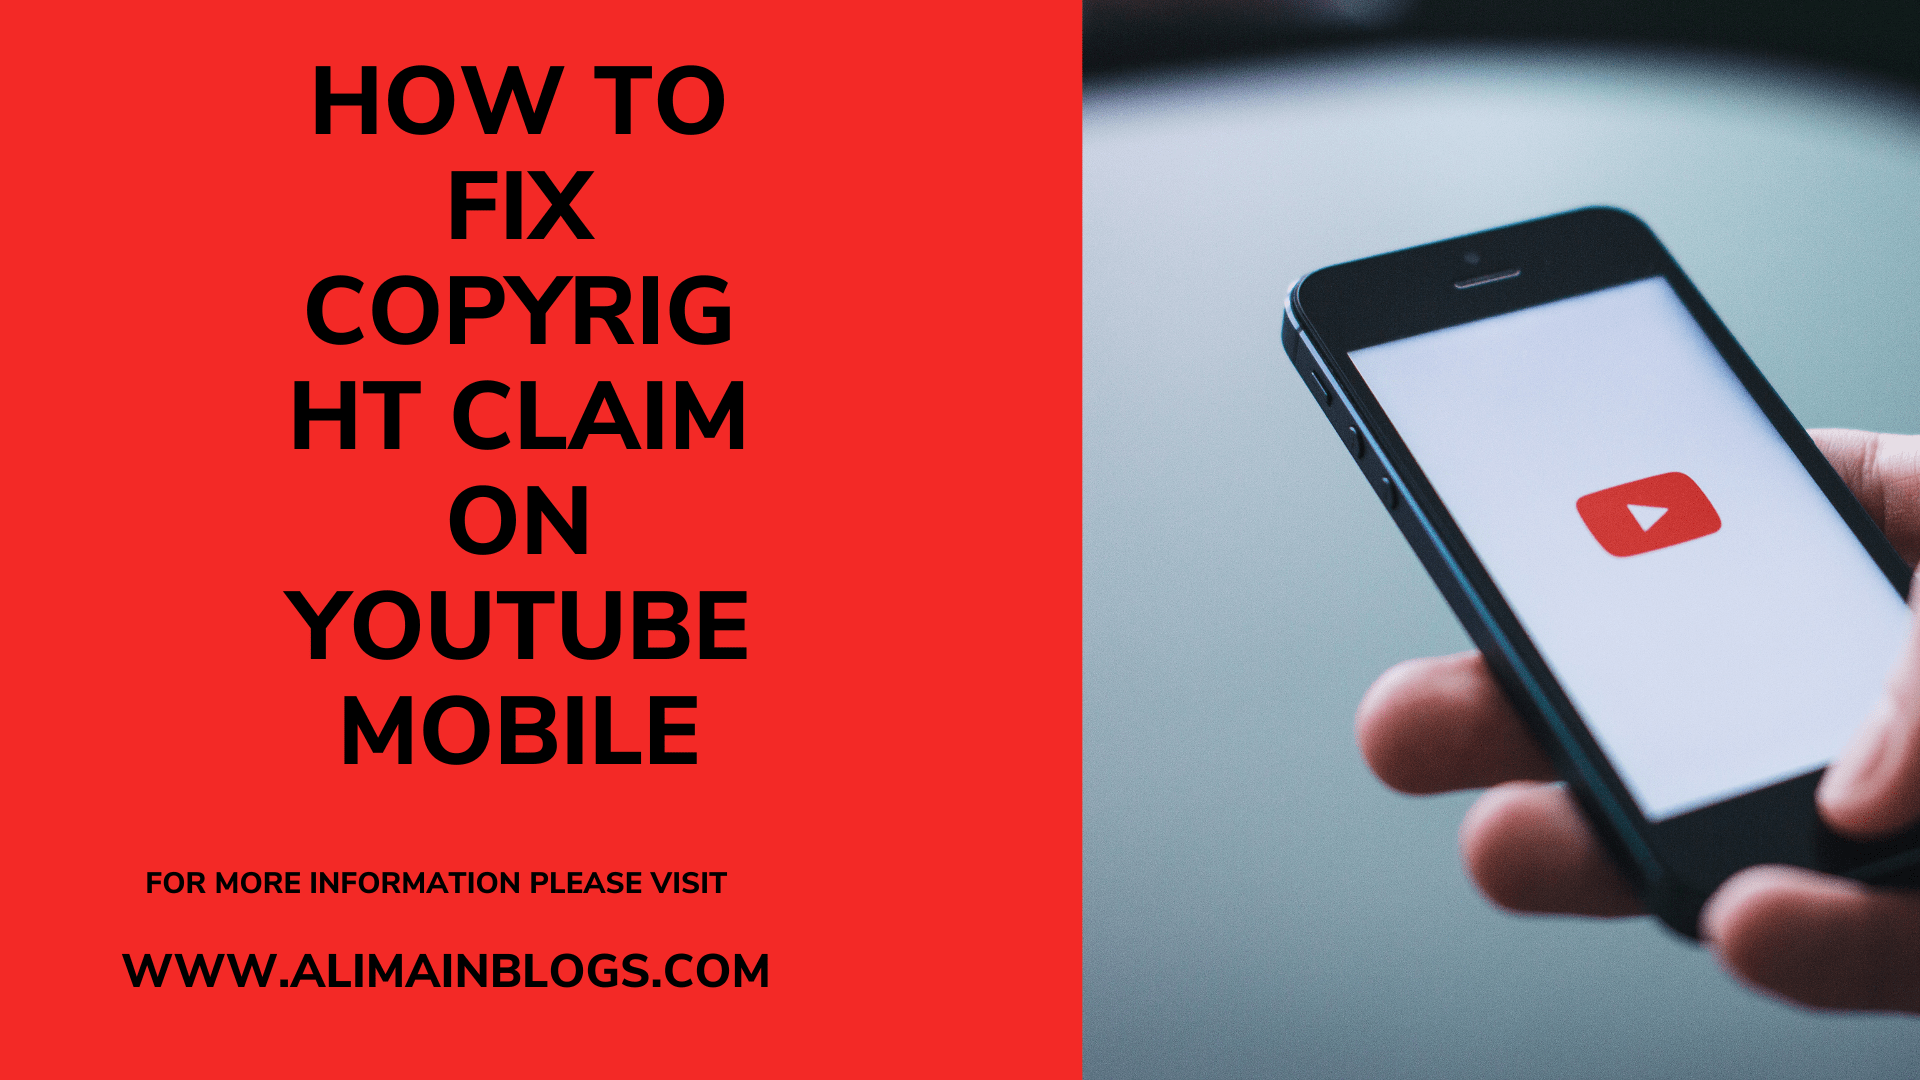 How to fix copyright claim on YouTube MOBILE